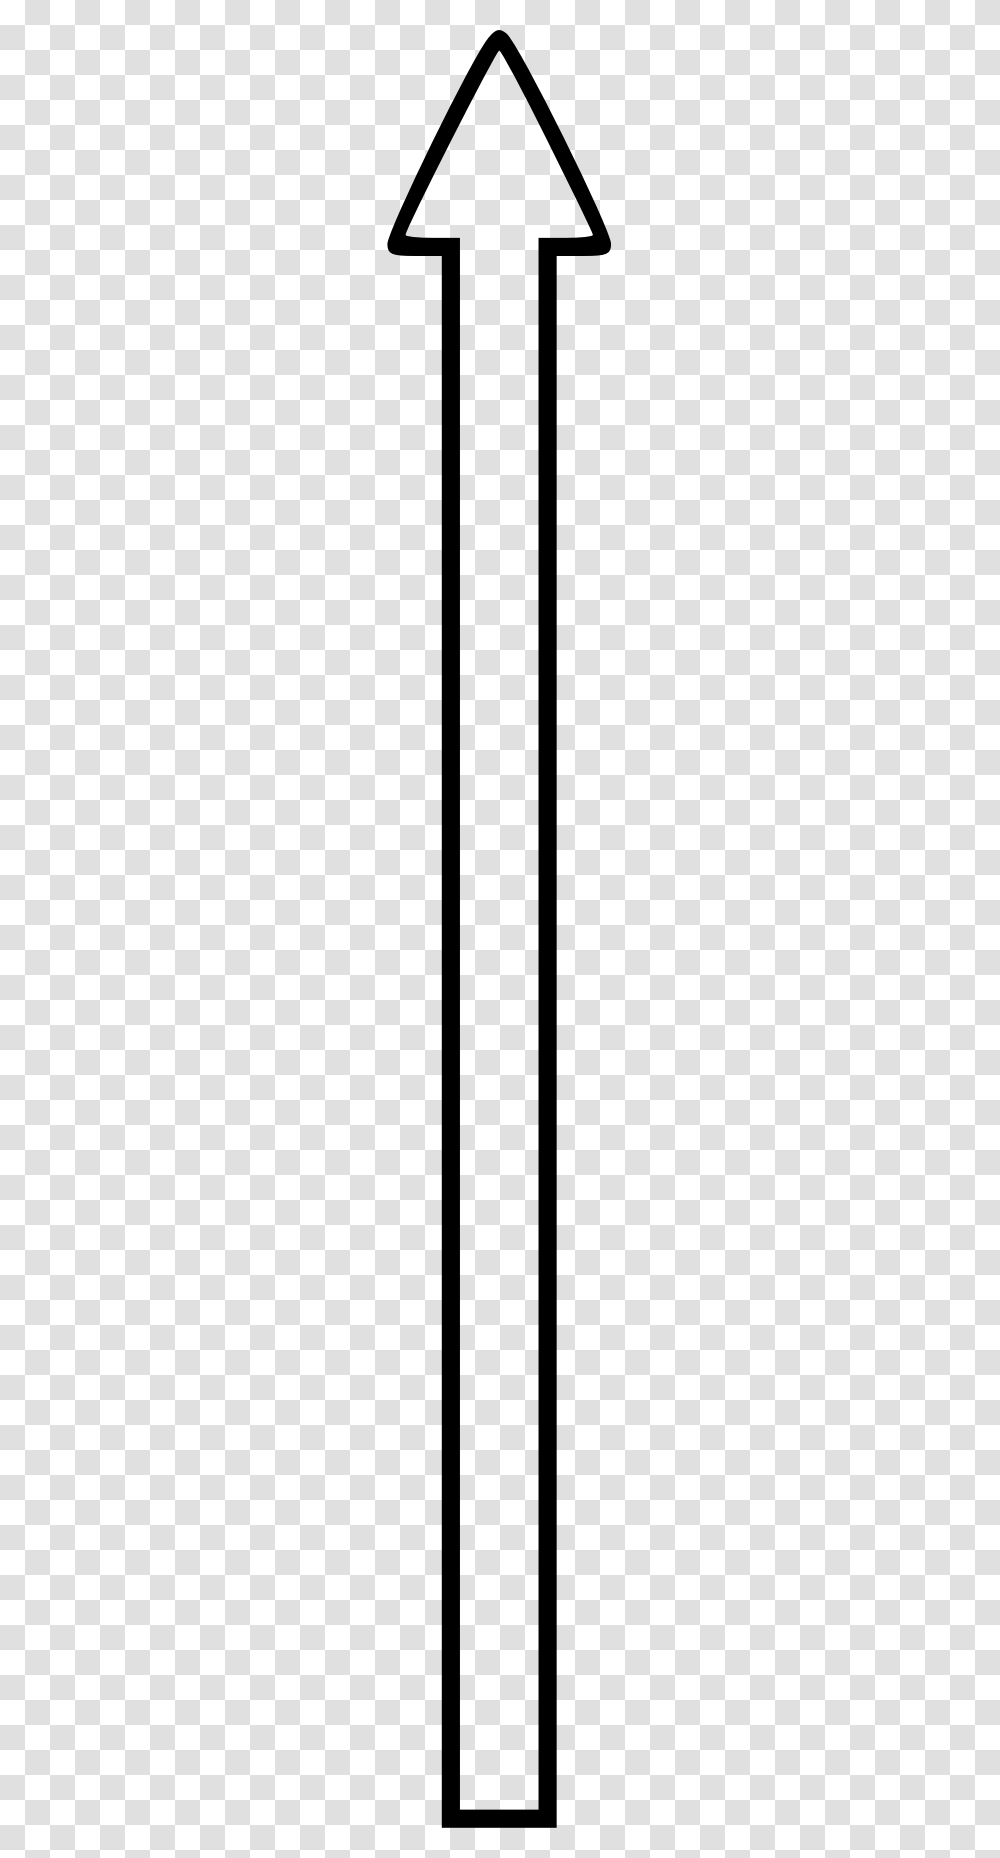 Simple Long Up Arrow Whitelack Border Icons, Gray, World Of Warcraft Transparent Png